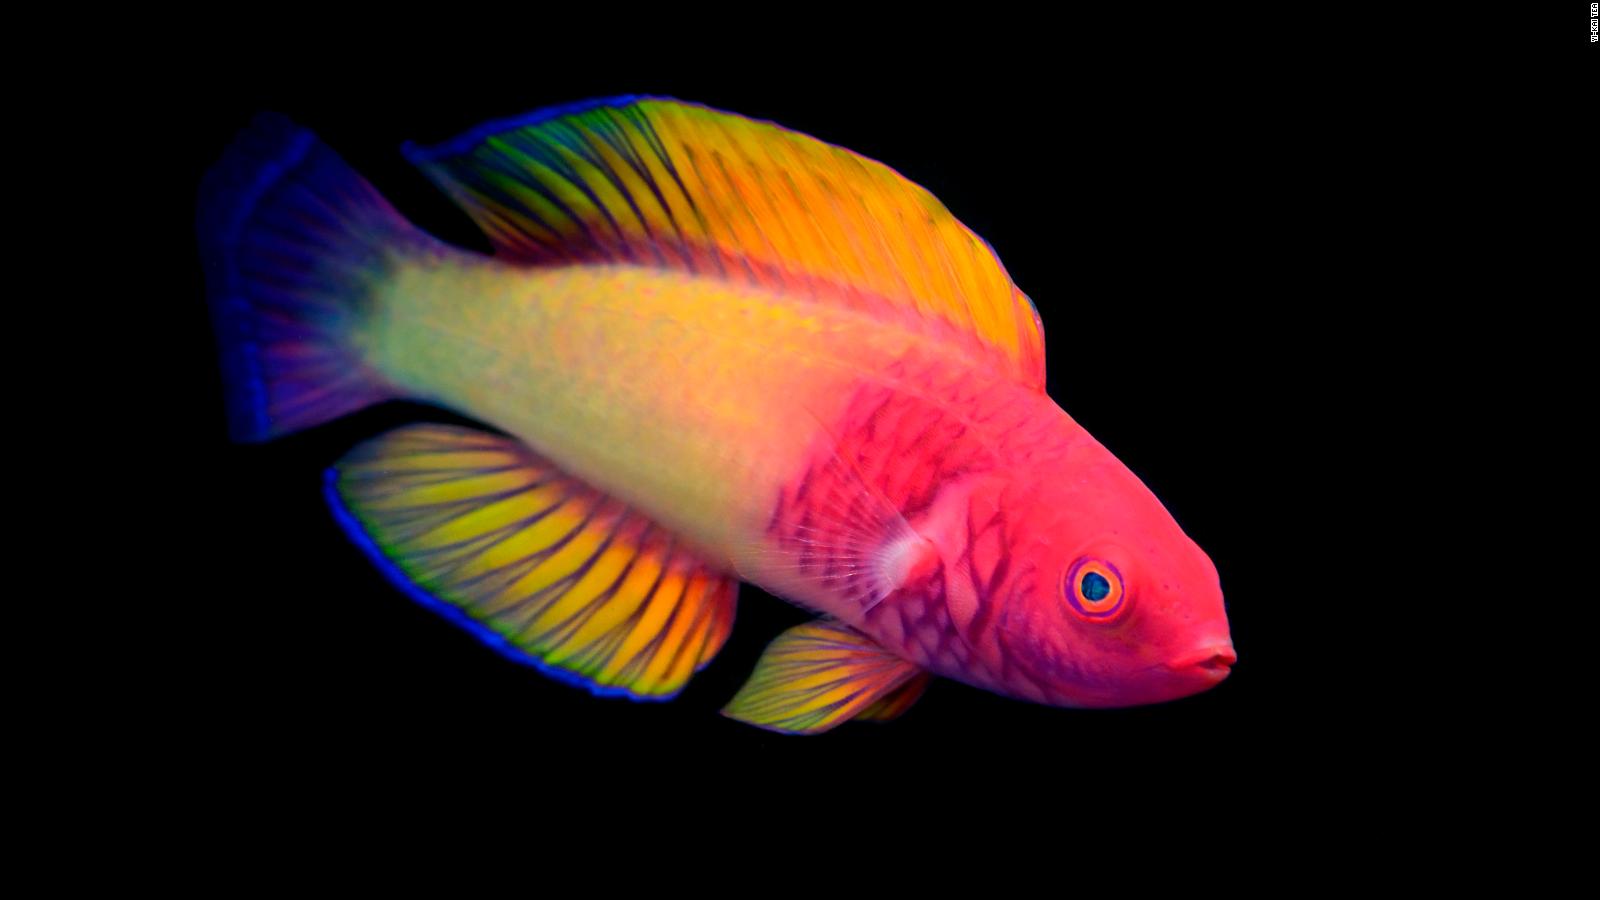 Learn about the colorful species of the ocean’s twilight zone